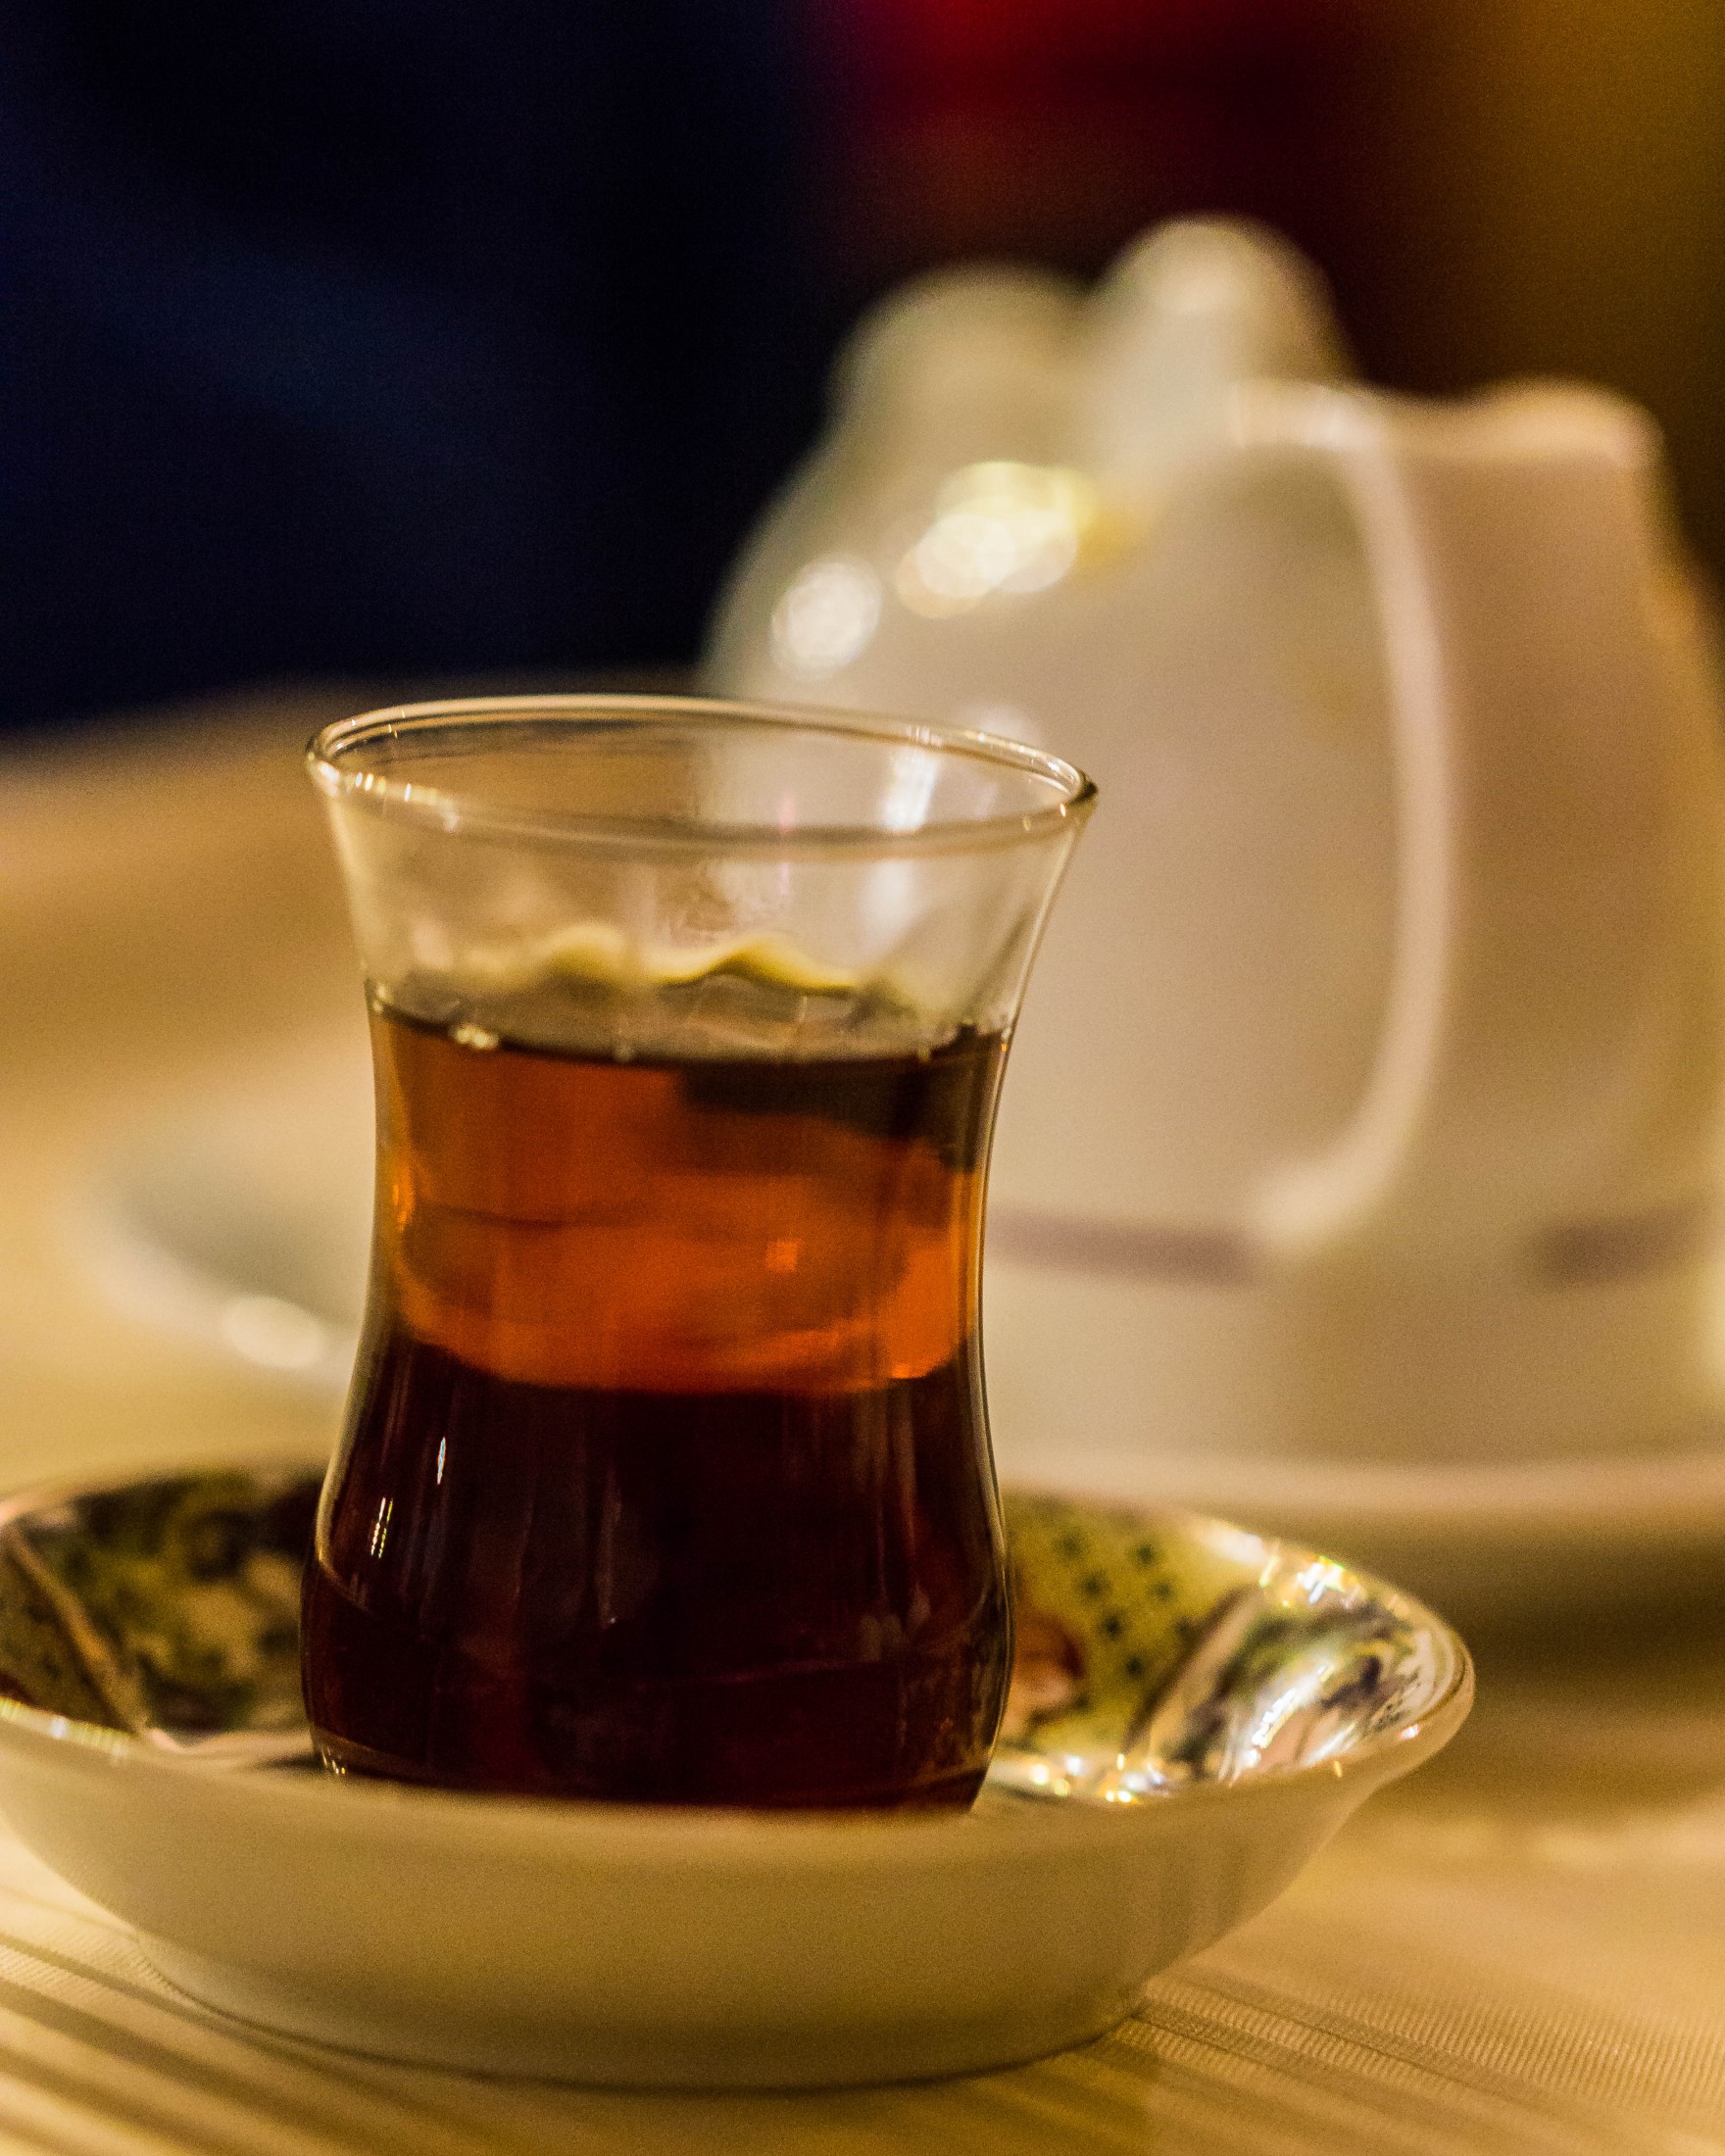 For the Love of Tea in Iran